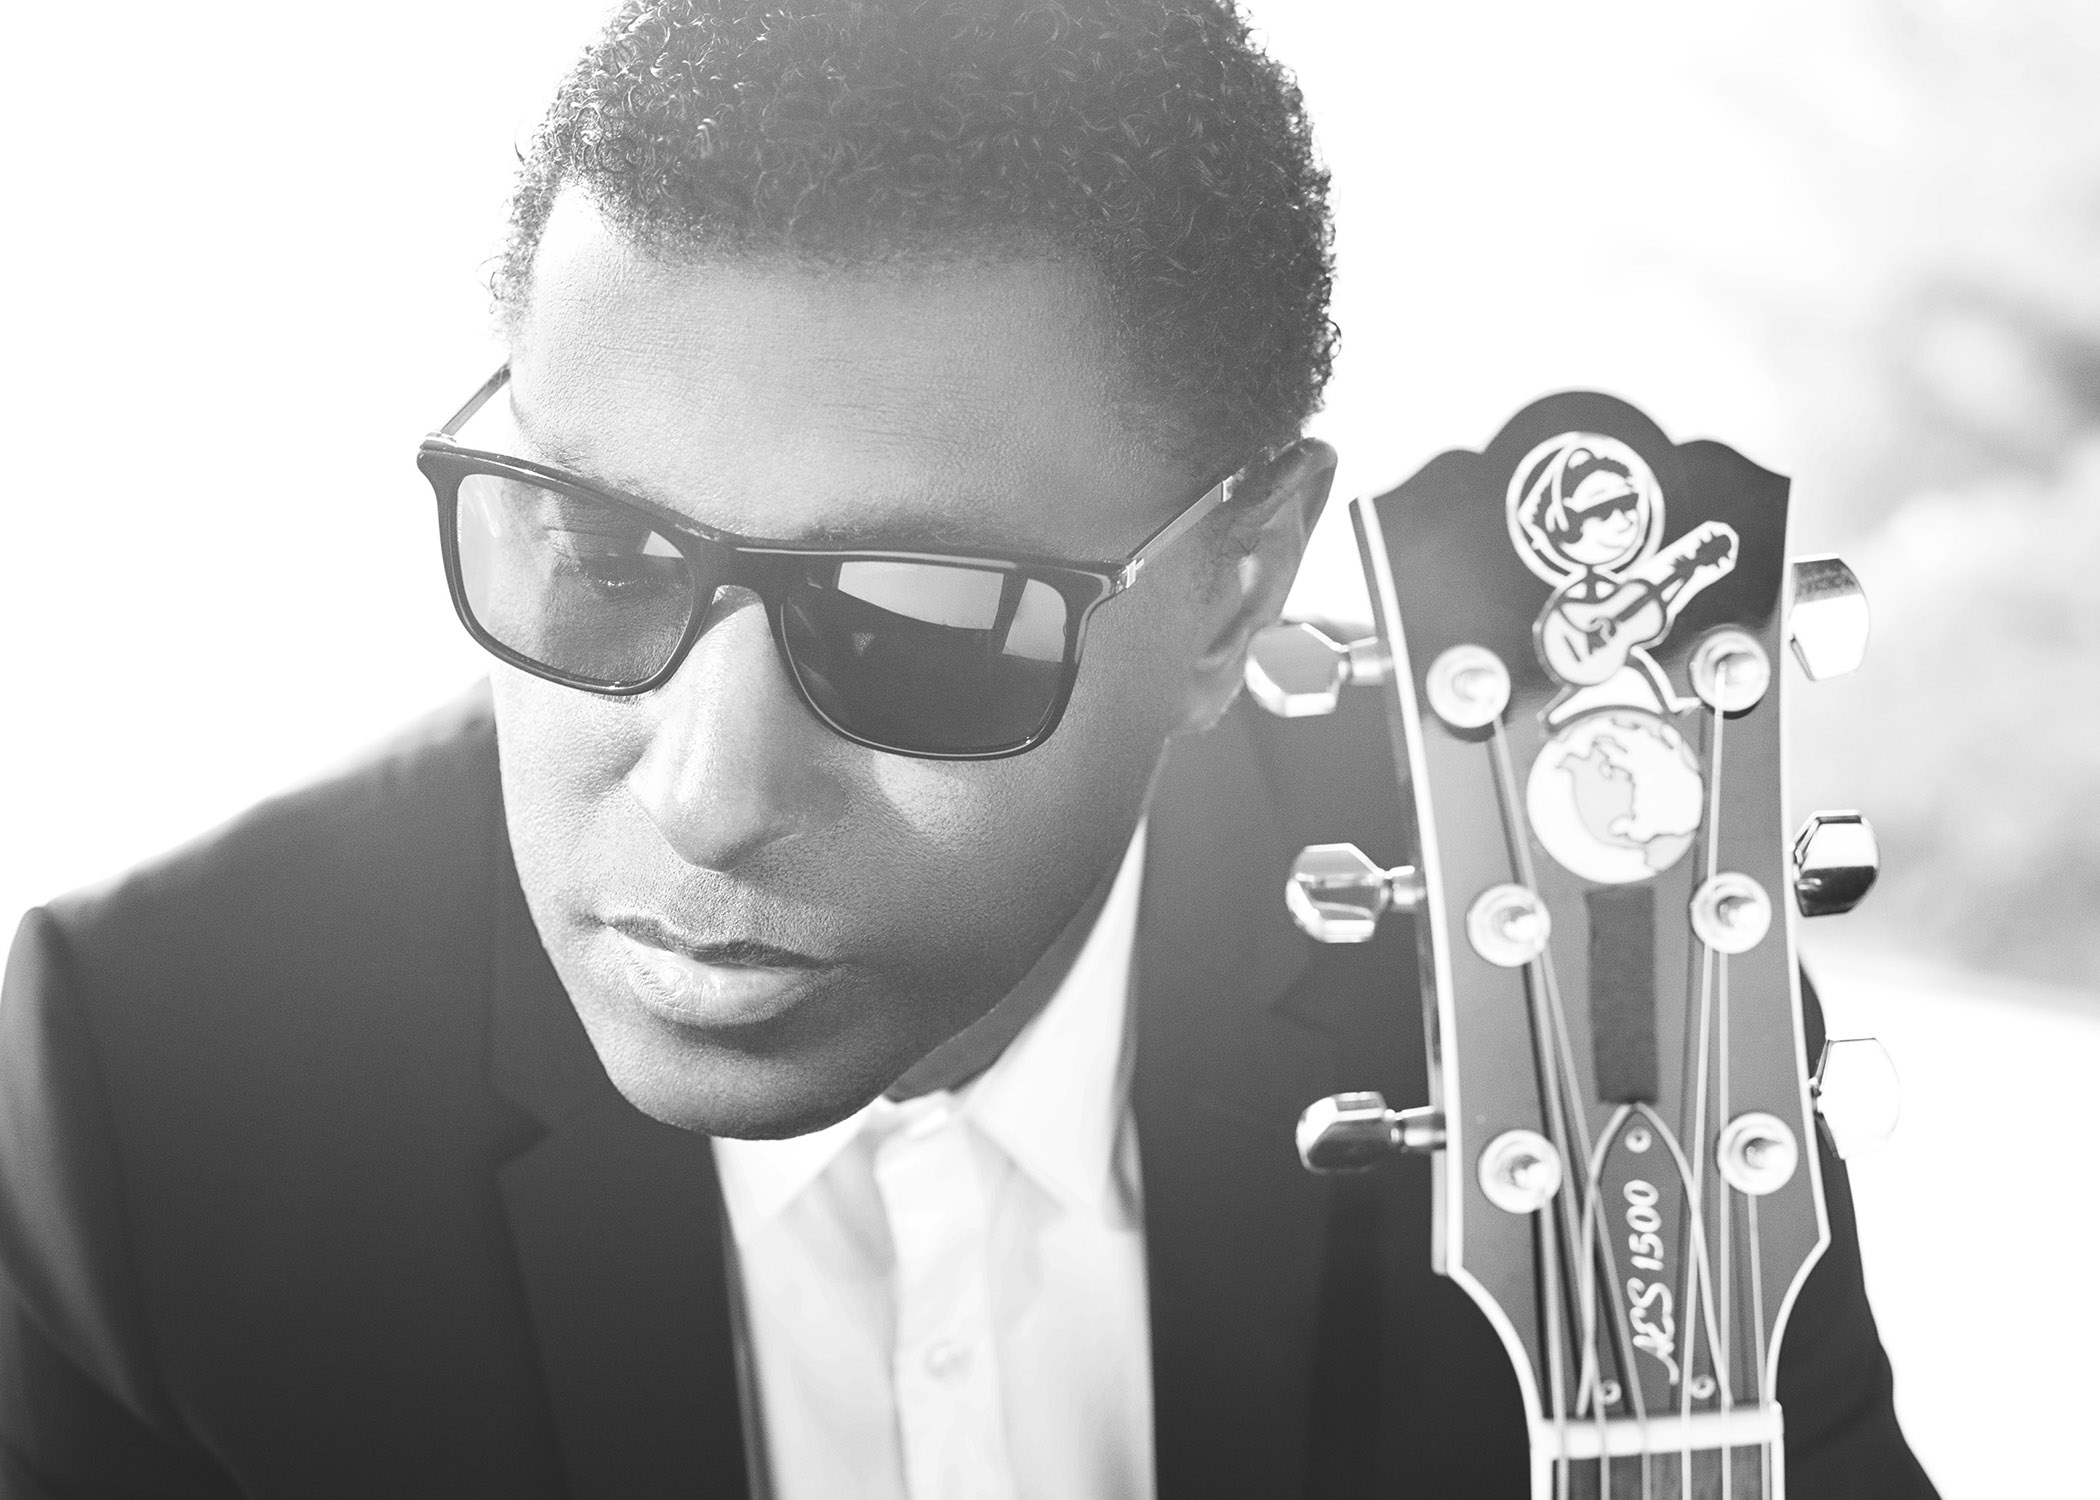 Eleven-time Grammy award-winning producer, songwriter and vocalist, Kenneth “Babyface” Edmonds will receive the 14th Uncommon Height Award from the National Council of Negro Womenon November 13 in Washington, D.C. (PRESS PHOTO)